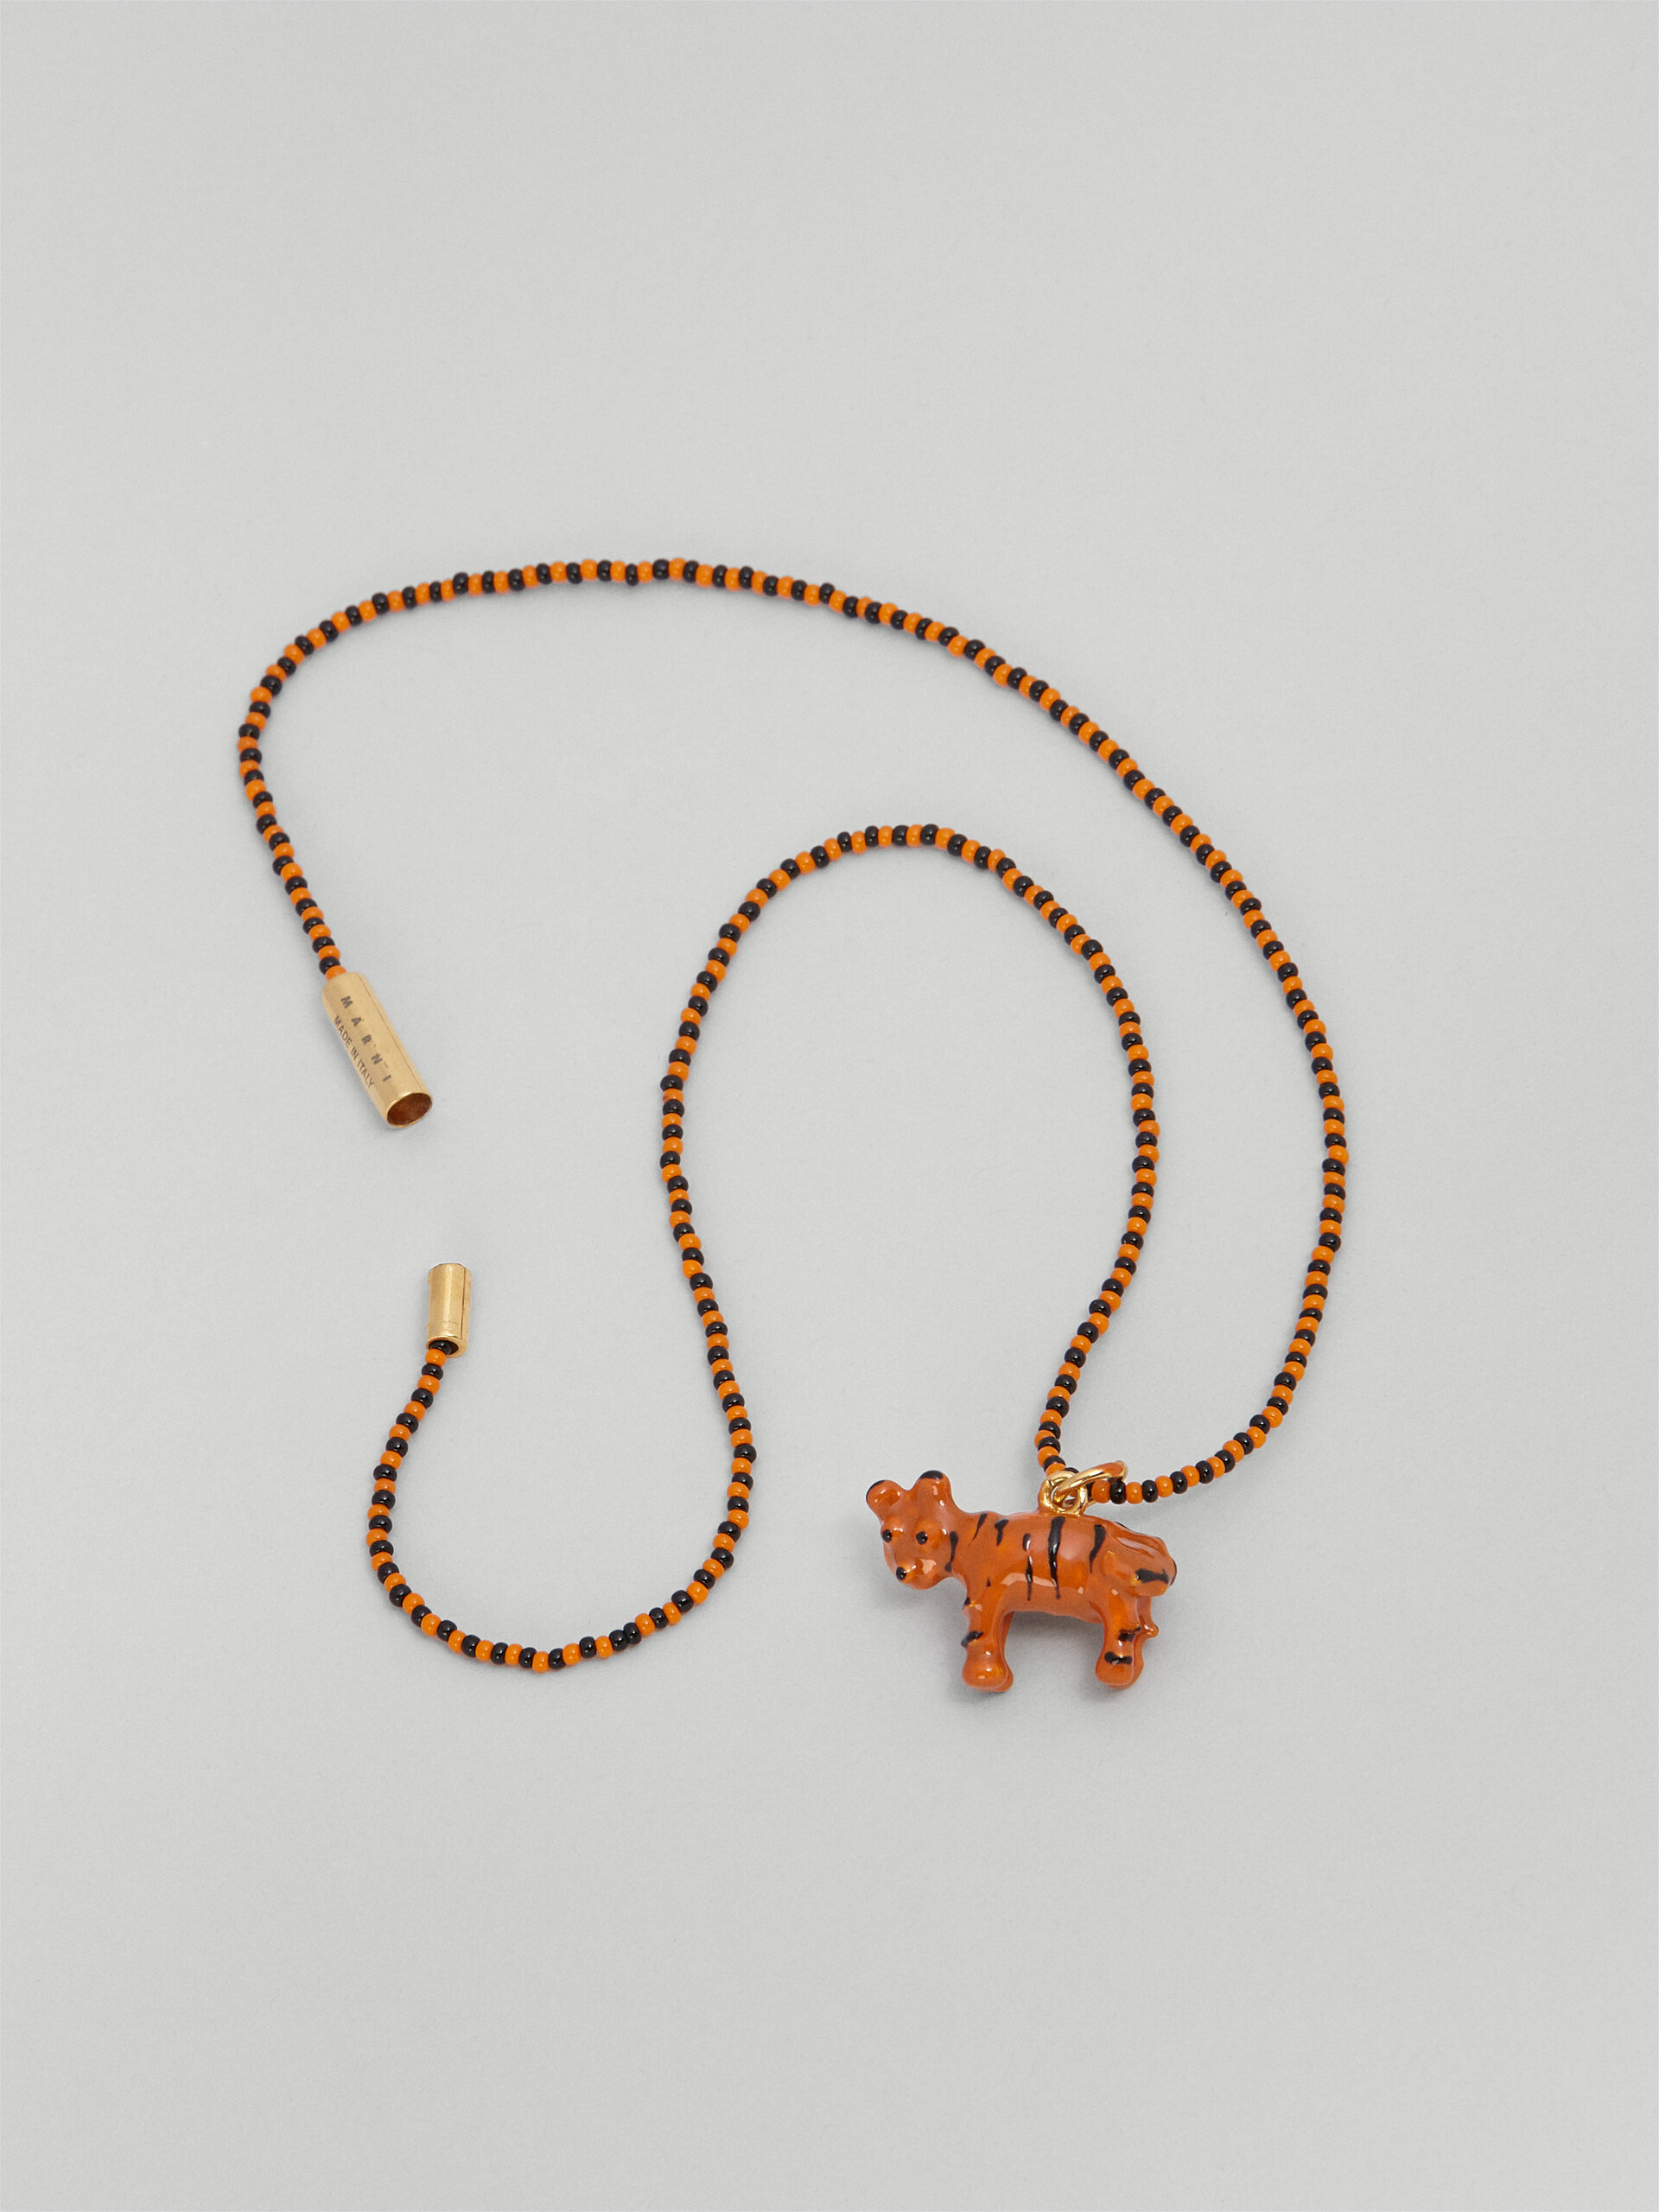 NAIF TIGER necklace in glass and resin - Necklaces - Image 4